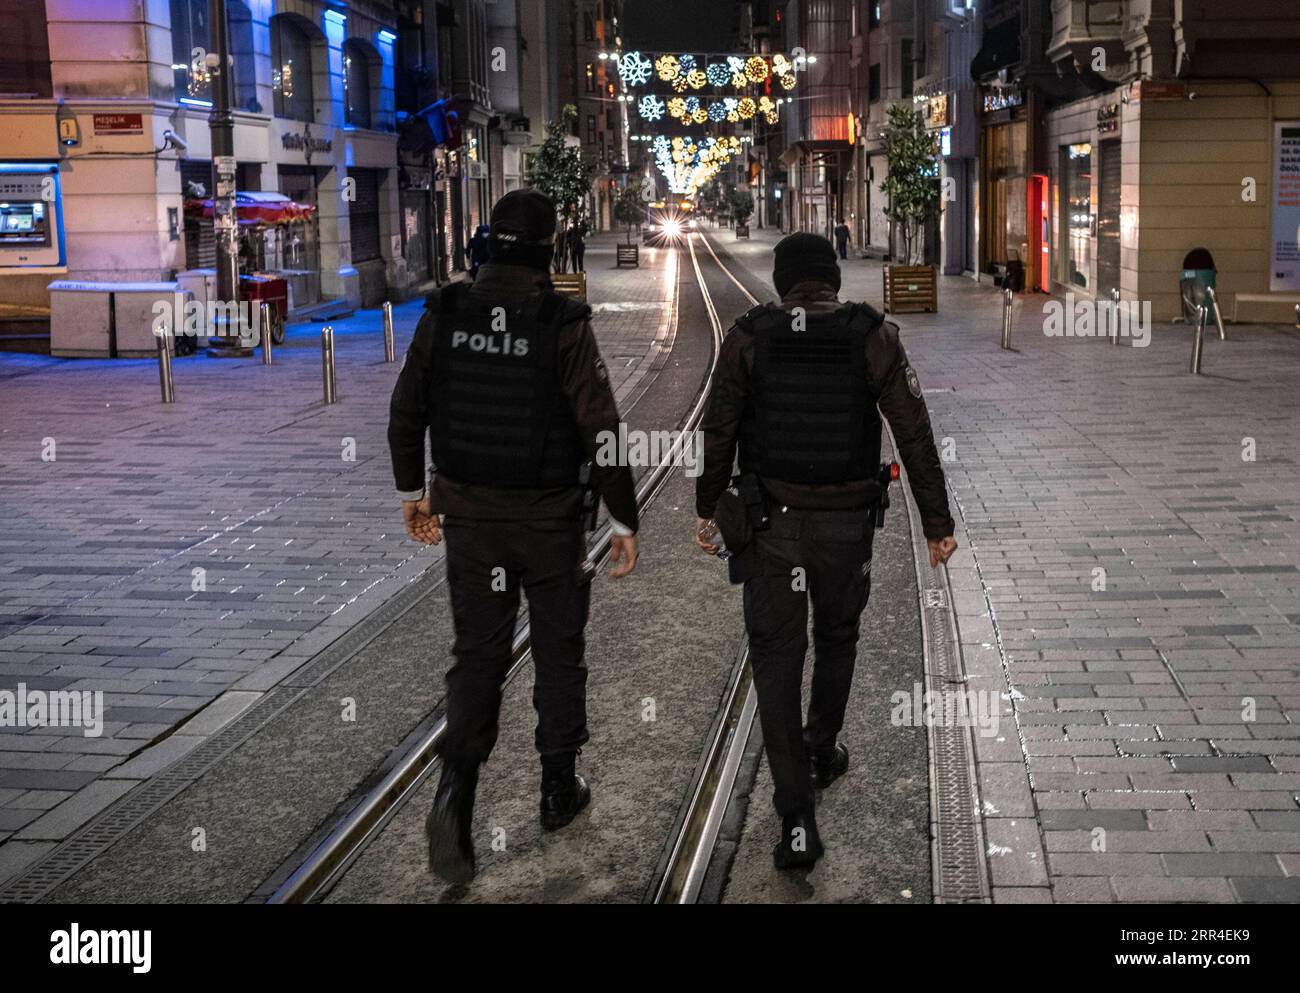 201202 -- ISTANBUL, Dec. 2, 2020 -- Police officers patrol on the street during a curfew, part of the new measures to curb the spread of the coronavirus, in Istanbul, Turkey, Dec. 1, 2020. Turkey confirmed 30,110 new coronavirus cases, including 6,101 symptomatic patients, raising the total number of infections and symptomatic COVID-19 patients in the country to 668,957 and 506,966, respectively, Turkey s Health Ministry said on Tuesday. Turkey also saw on Tuesday the first nighttime curfew imposed on weekdays to curb the hike in the number of COVID-19 cases. Local residents emptied boulevards Stock Photo